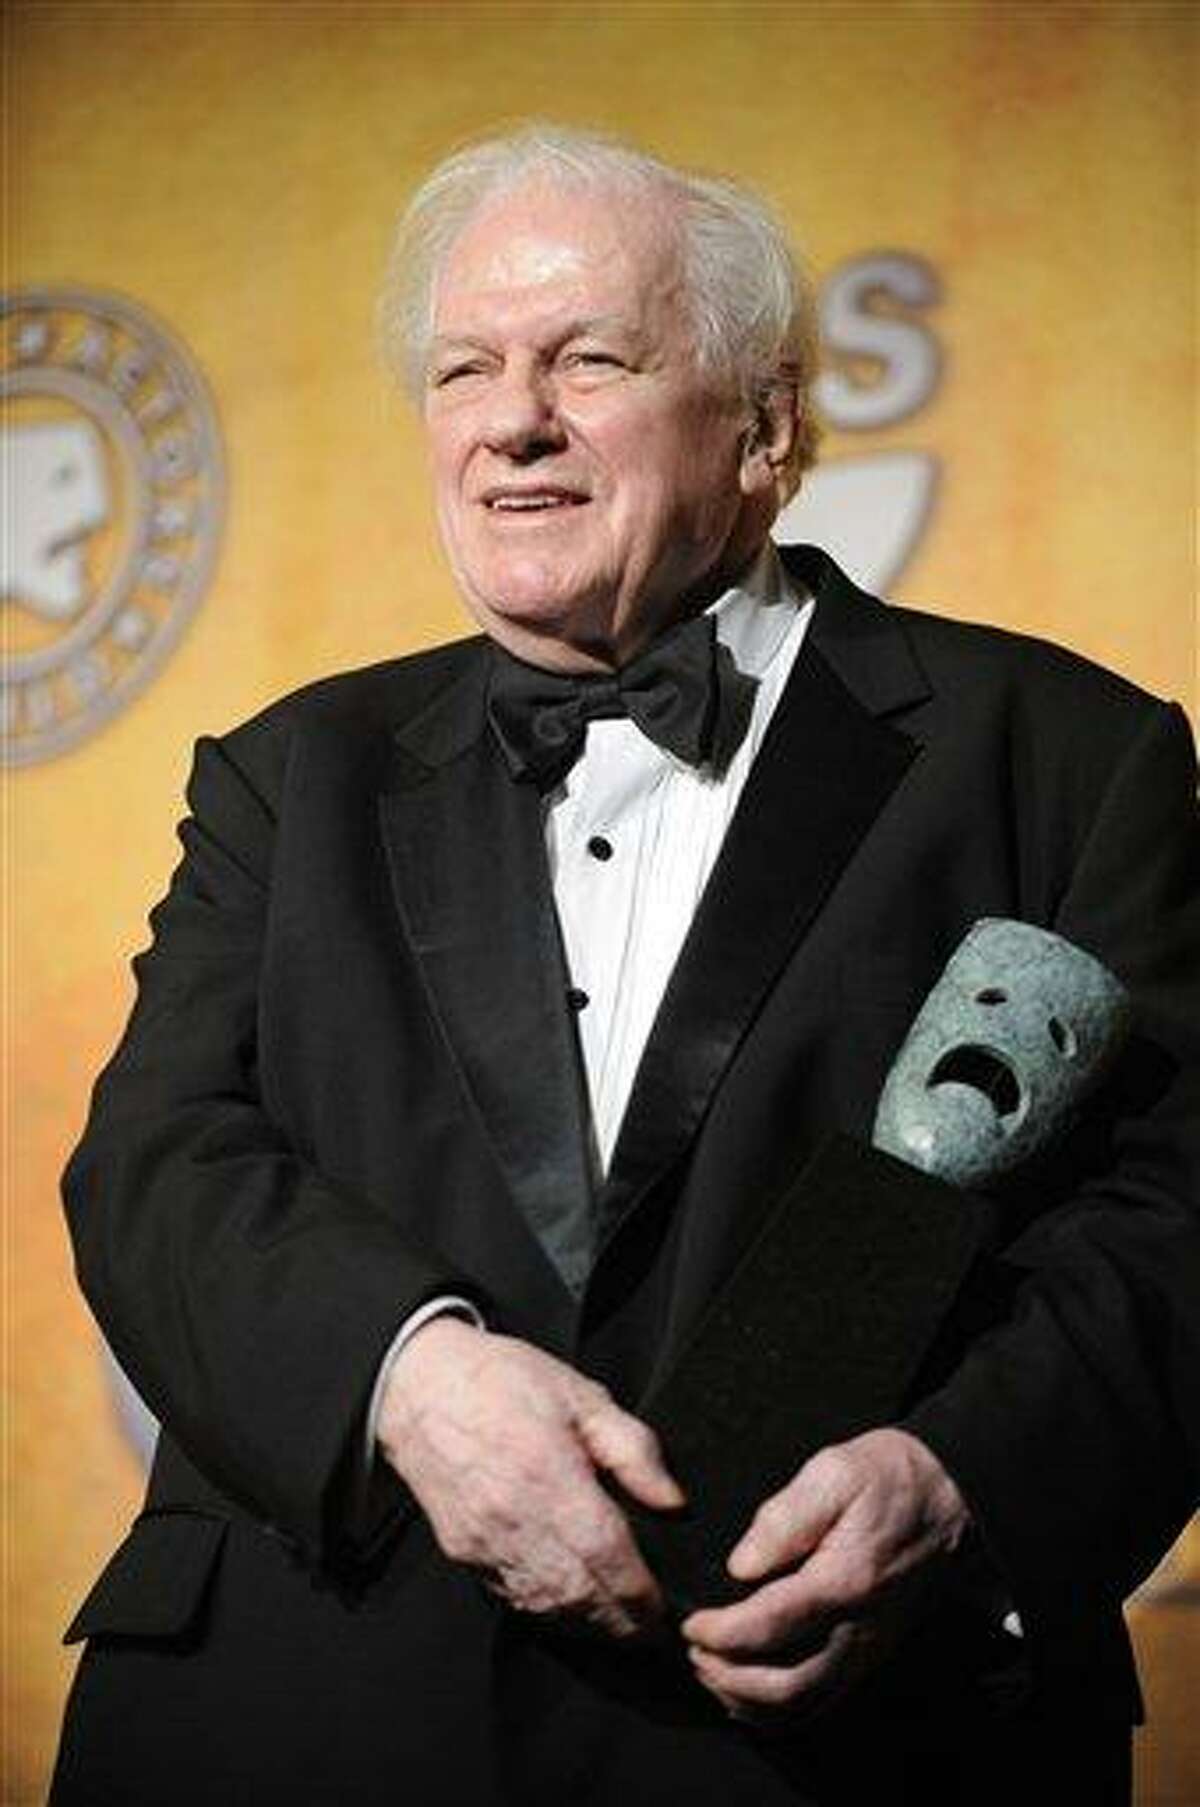 In this Sunday, Jan. 27, 2008 photo, Charles Durning holds his life achievement award at the 14th Annual Screen Actors Guild Awards in Los Angeles. Durning, the two-time Oscar nominee who was dubbed the king of the character actors for his skill in playing everything from a Nazi colonel to the pope, died Monday, Dec. 24, 2012 at his home in New York City. He was 89. (AP Photo/Chris Pizzello)